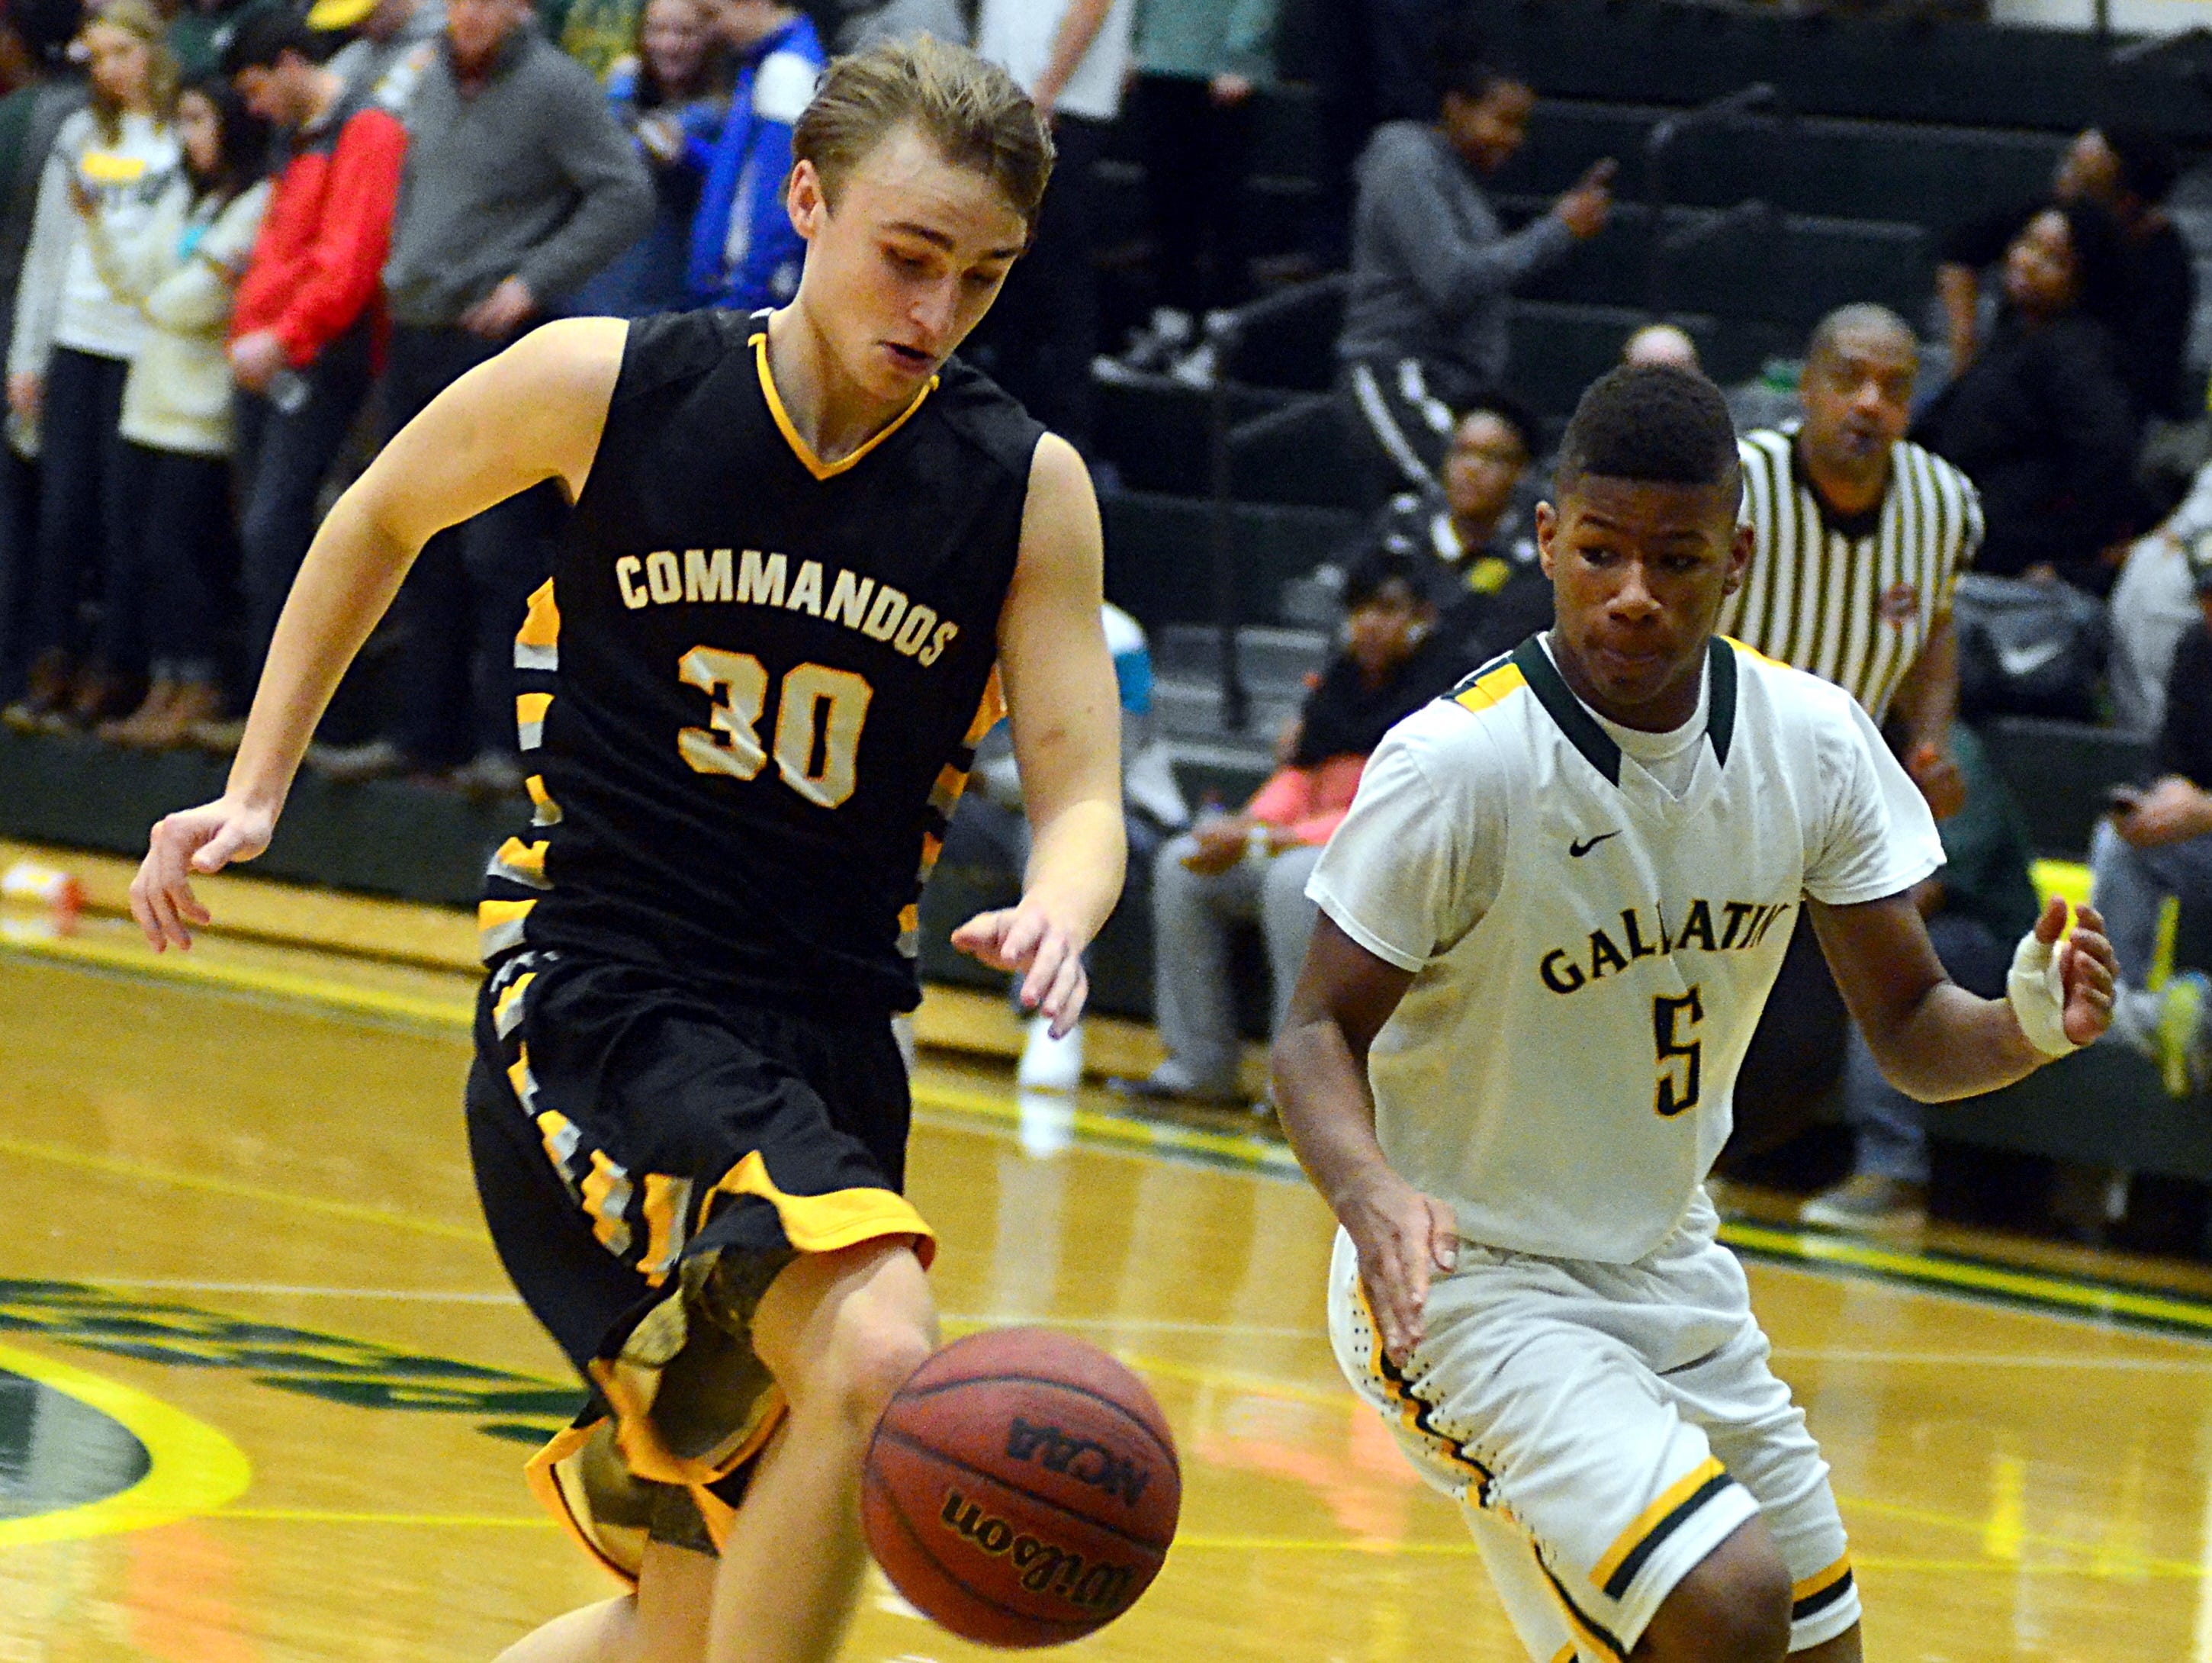 Hendersonville High junior guard Ryne Loper and Gallatin sophomore guard Nigel Black pursue a loose ball during third-quarter action.